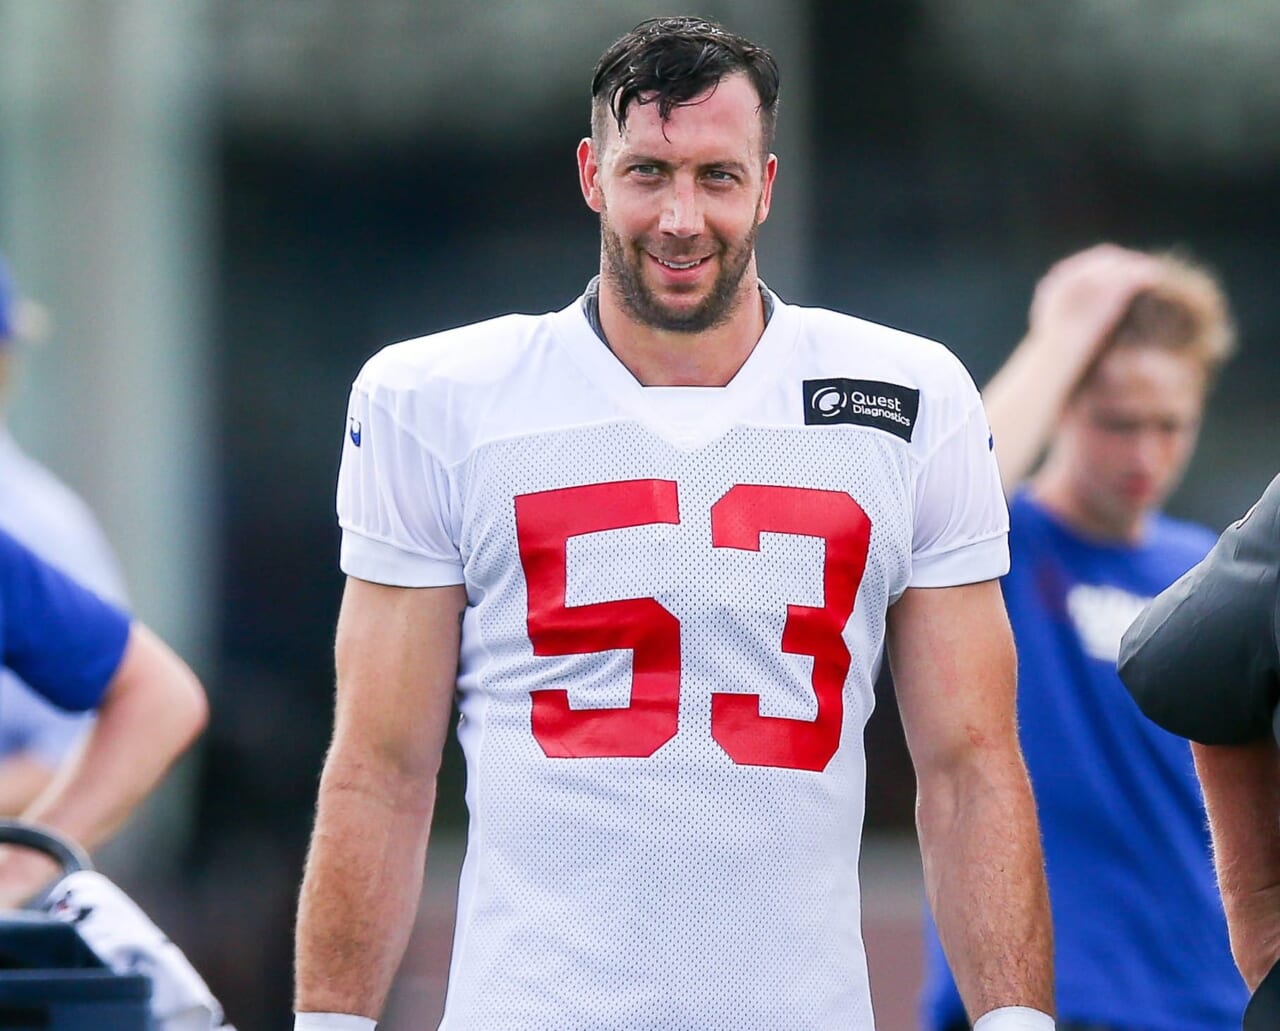 New York Giants: Connor Barwin Released After First Season With Team